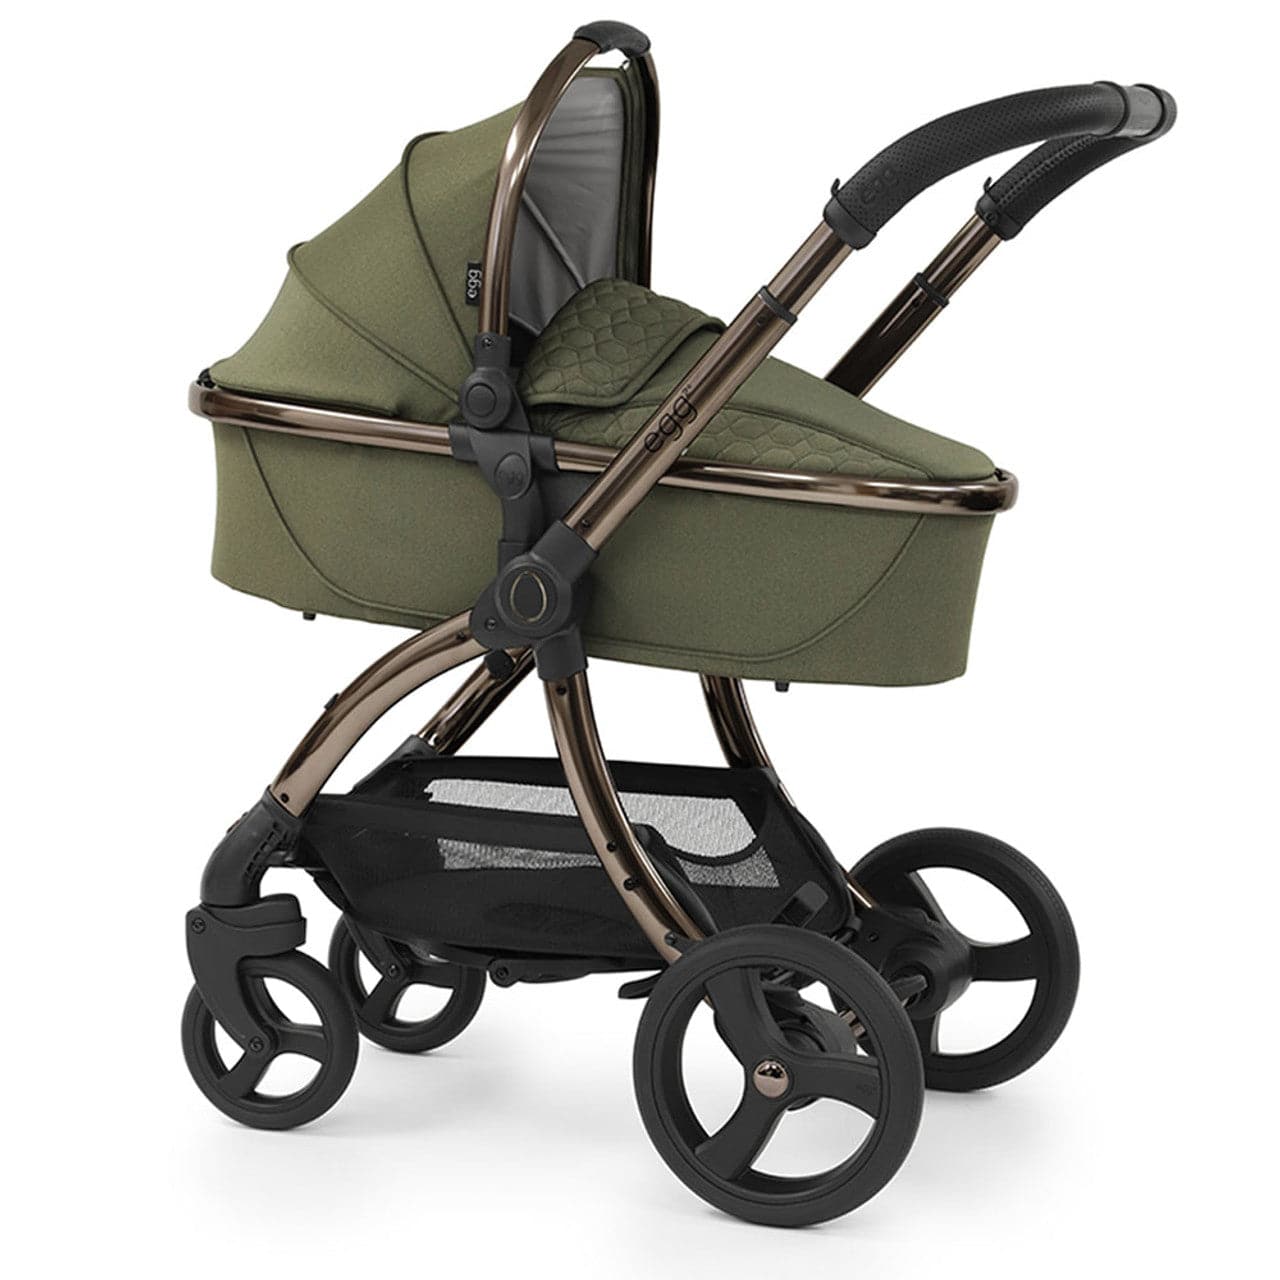 Egg® 2 Pushchair + Carrycot - Hunter Green - For Your Little One